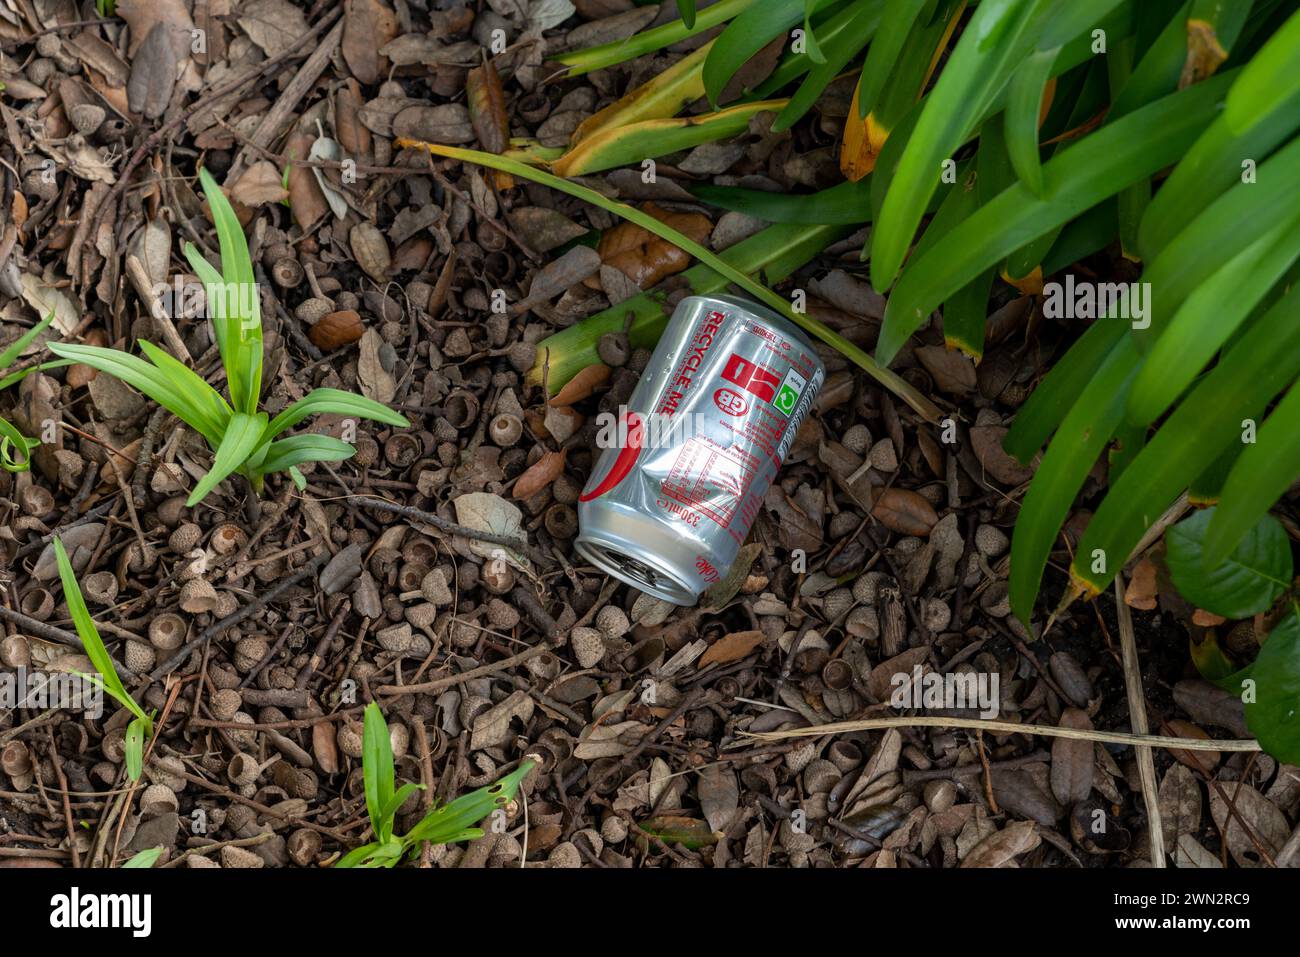 The irony of a discarded aluminium soft drink can thrown into some bushes, with the 'recycle me' text clearly visible. Stock Photo